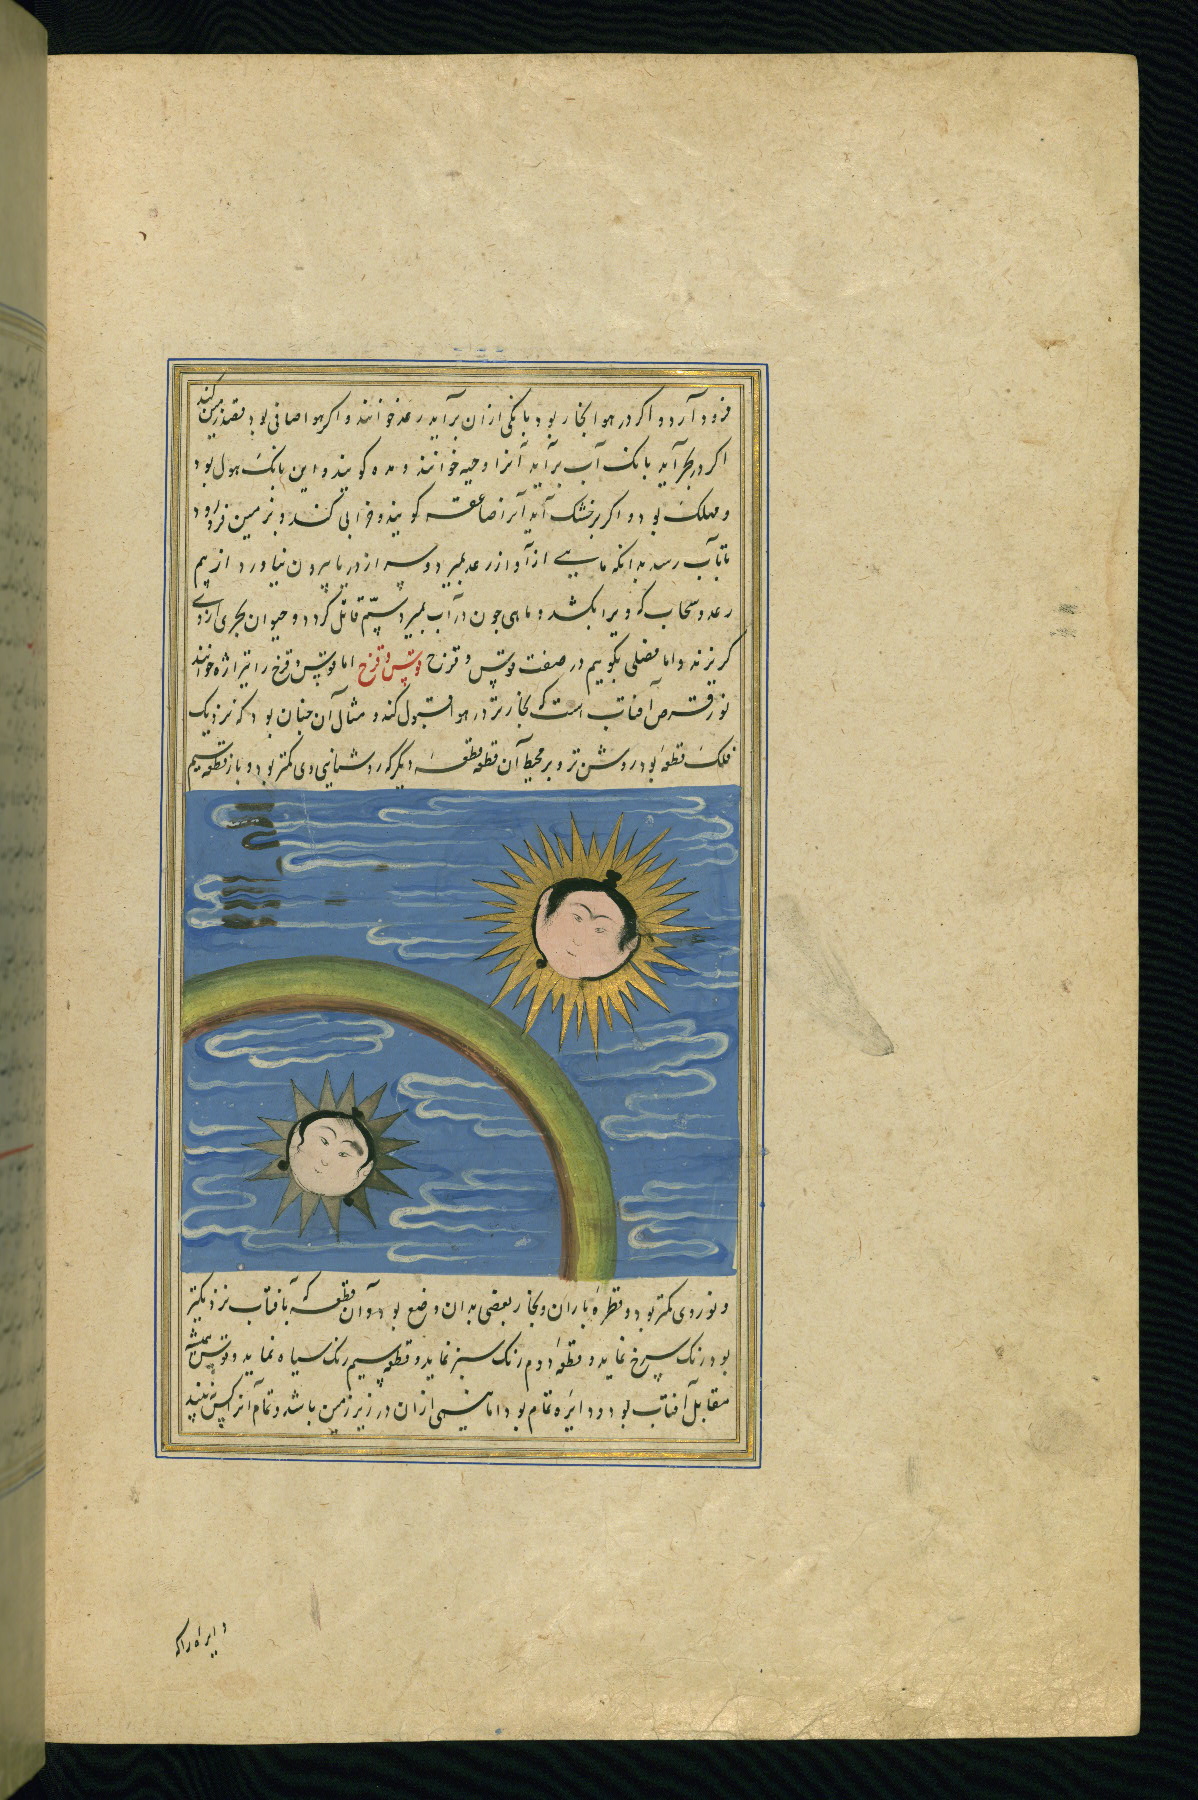 Wonders of Creation by Unknown Artist - 16th CE - 23.5 x 36.0 cm Walters Art Museum